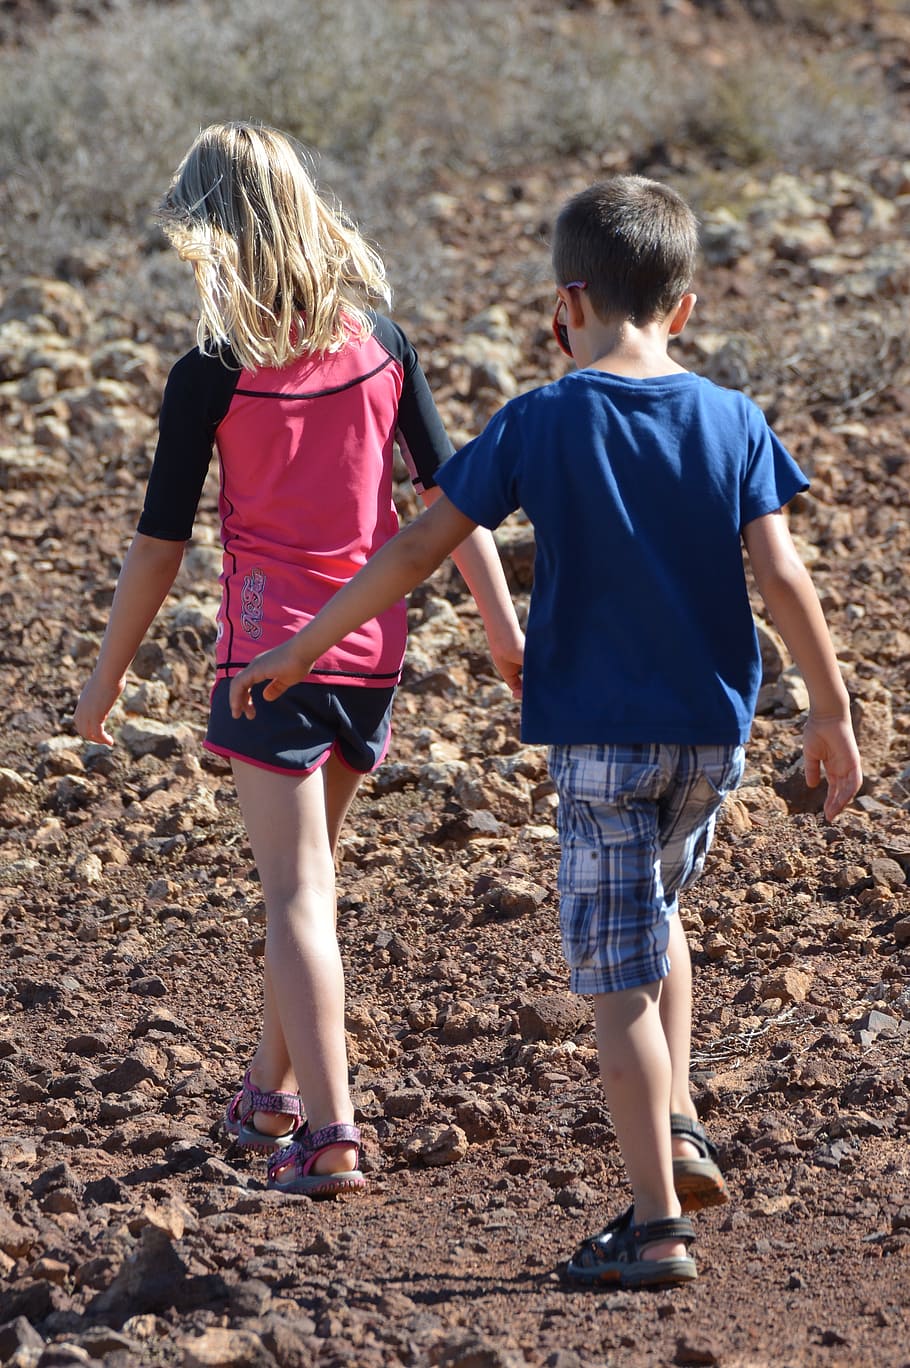 children, people, boy, girl, hiking, sports, motion, child, childhood, two people